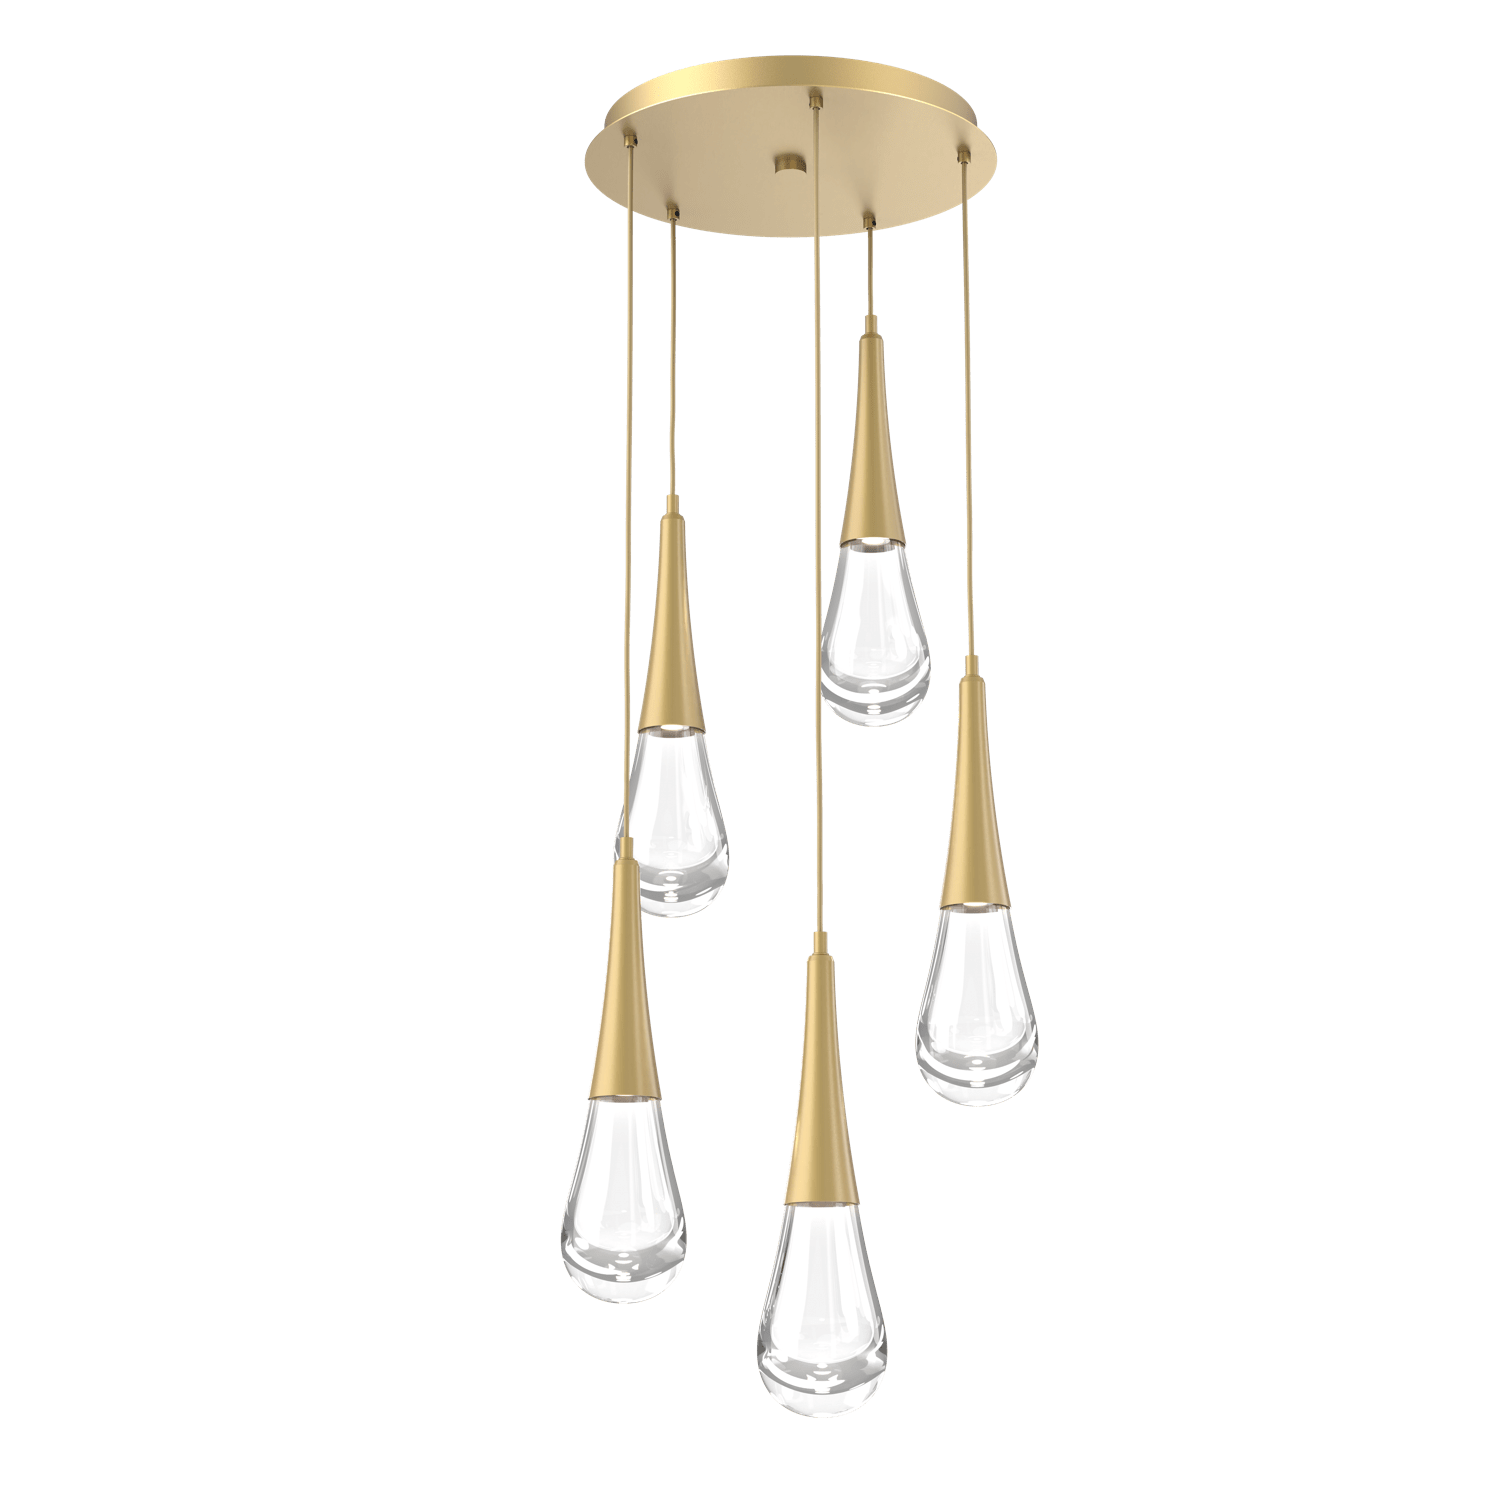 CHB0078-05-GB-Hammerton-Studio-Raindrop-5-light-round-pendant-chandelier-with-gilded-brass-finish-and-clear-blown-glass-shades-and-LED-lamping